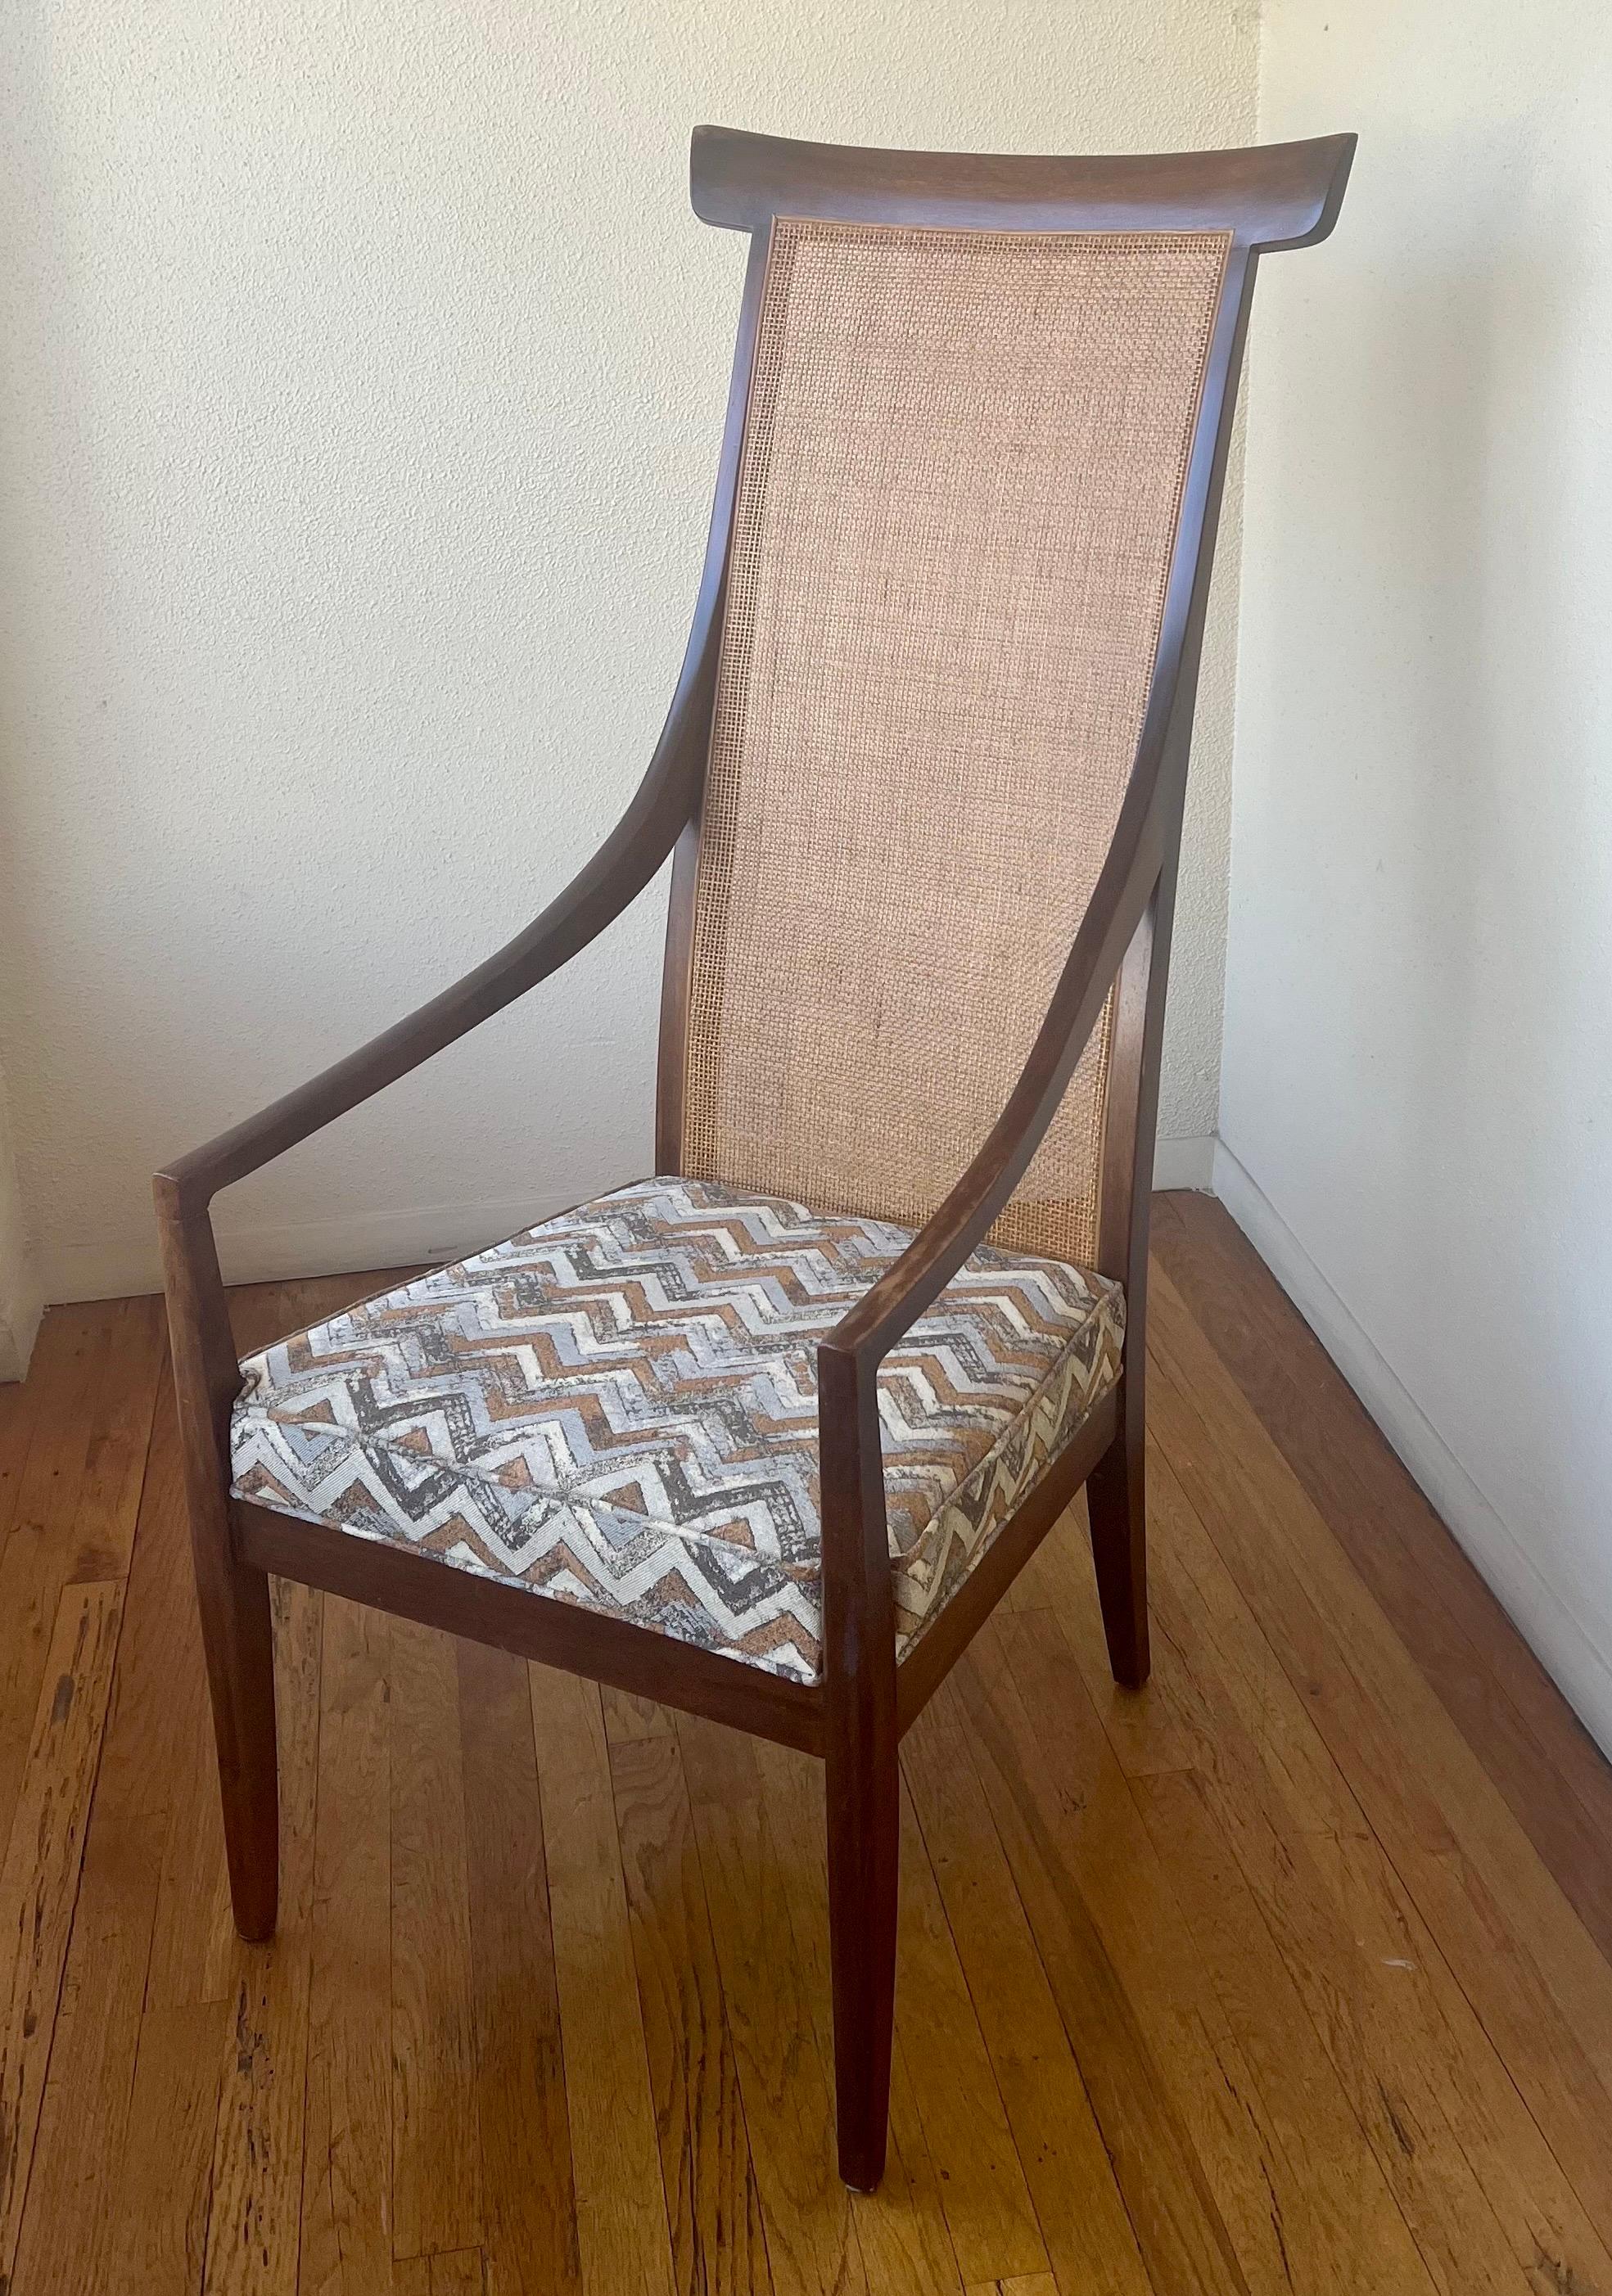 Incredible rare solid walnut frame with cane back, American mid-century upholstered chair beautiful original condition nice chevron upholstered seat.